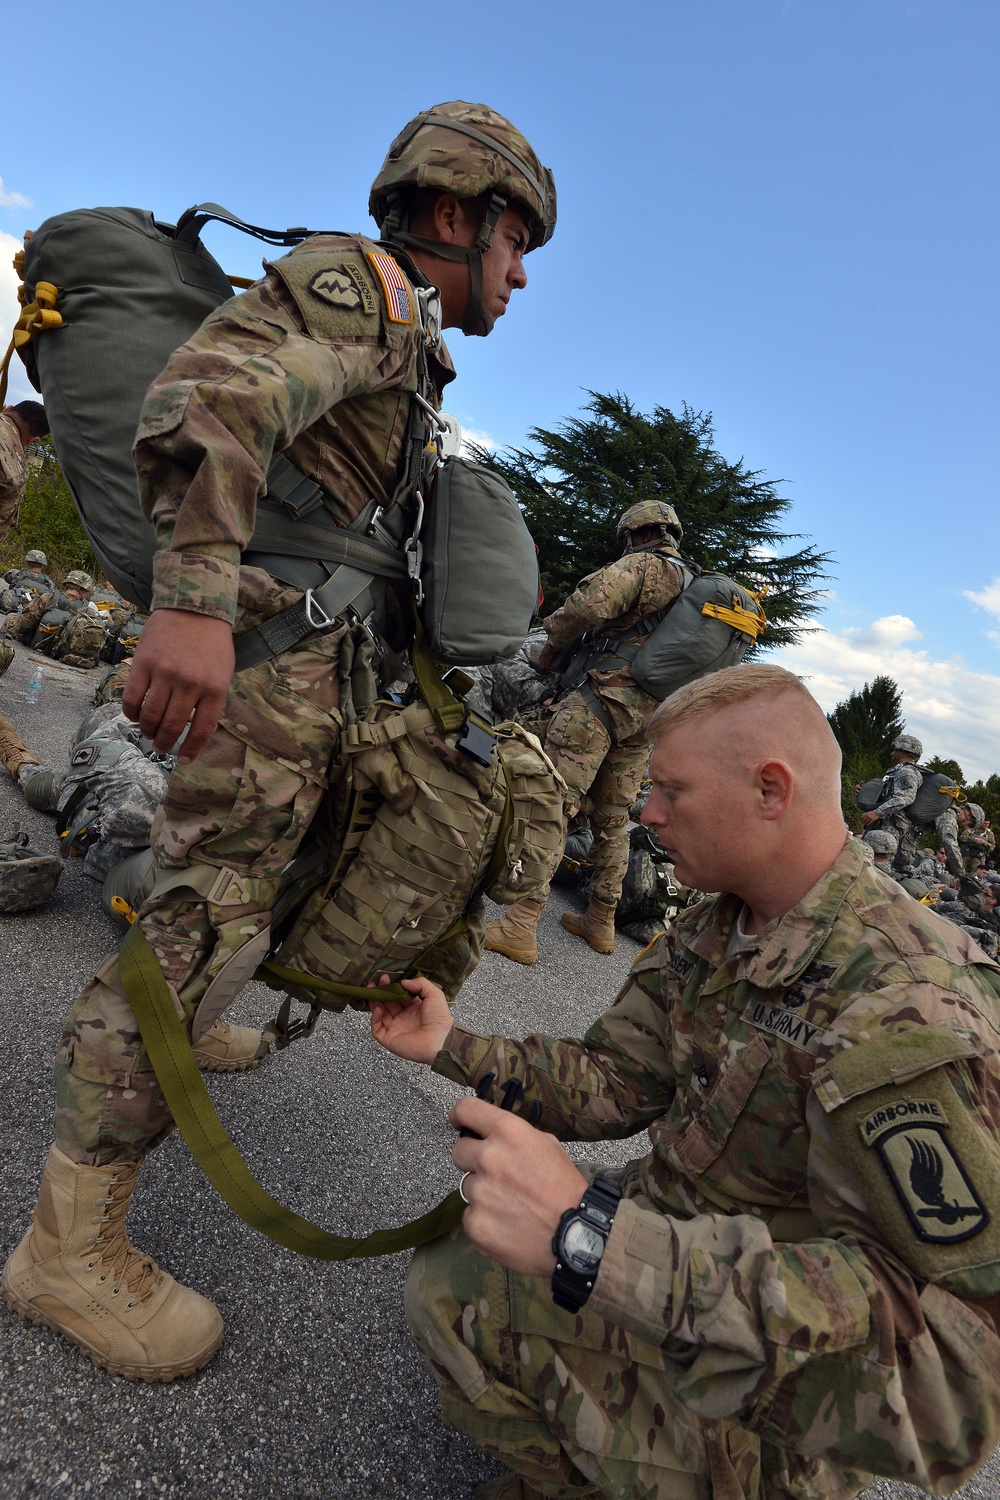 Airborne Operation at Juliet Drop Zone in Pordenone, Italy, September 2015